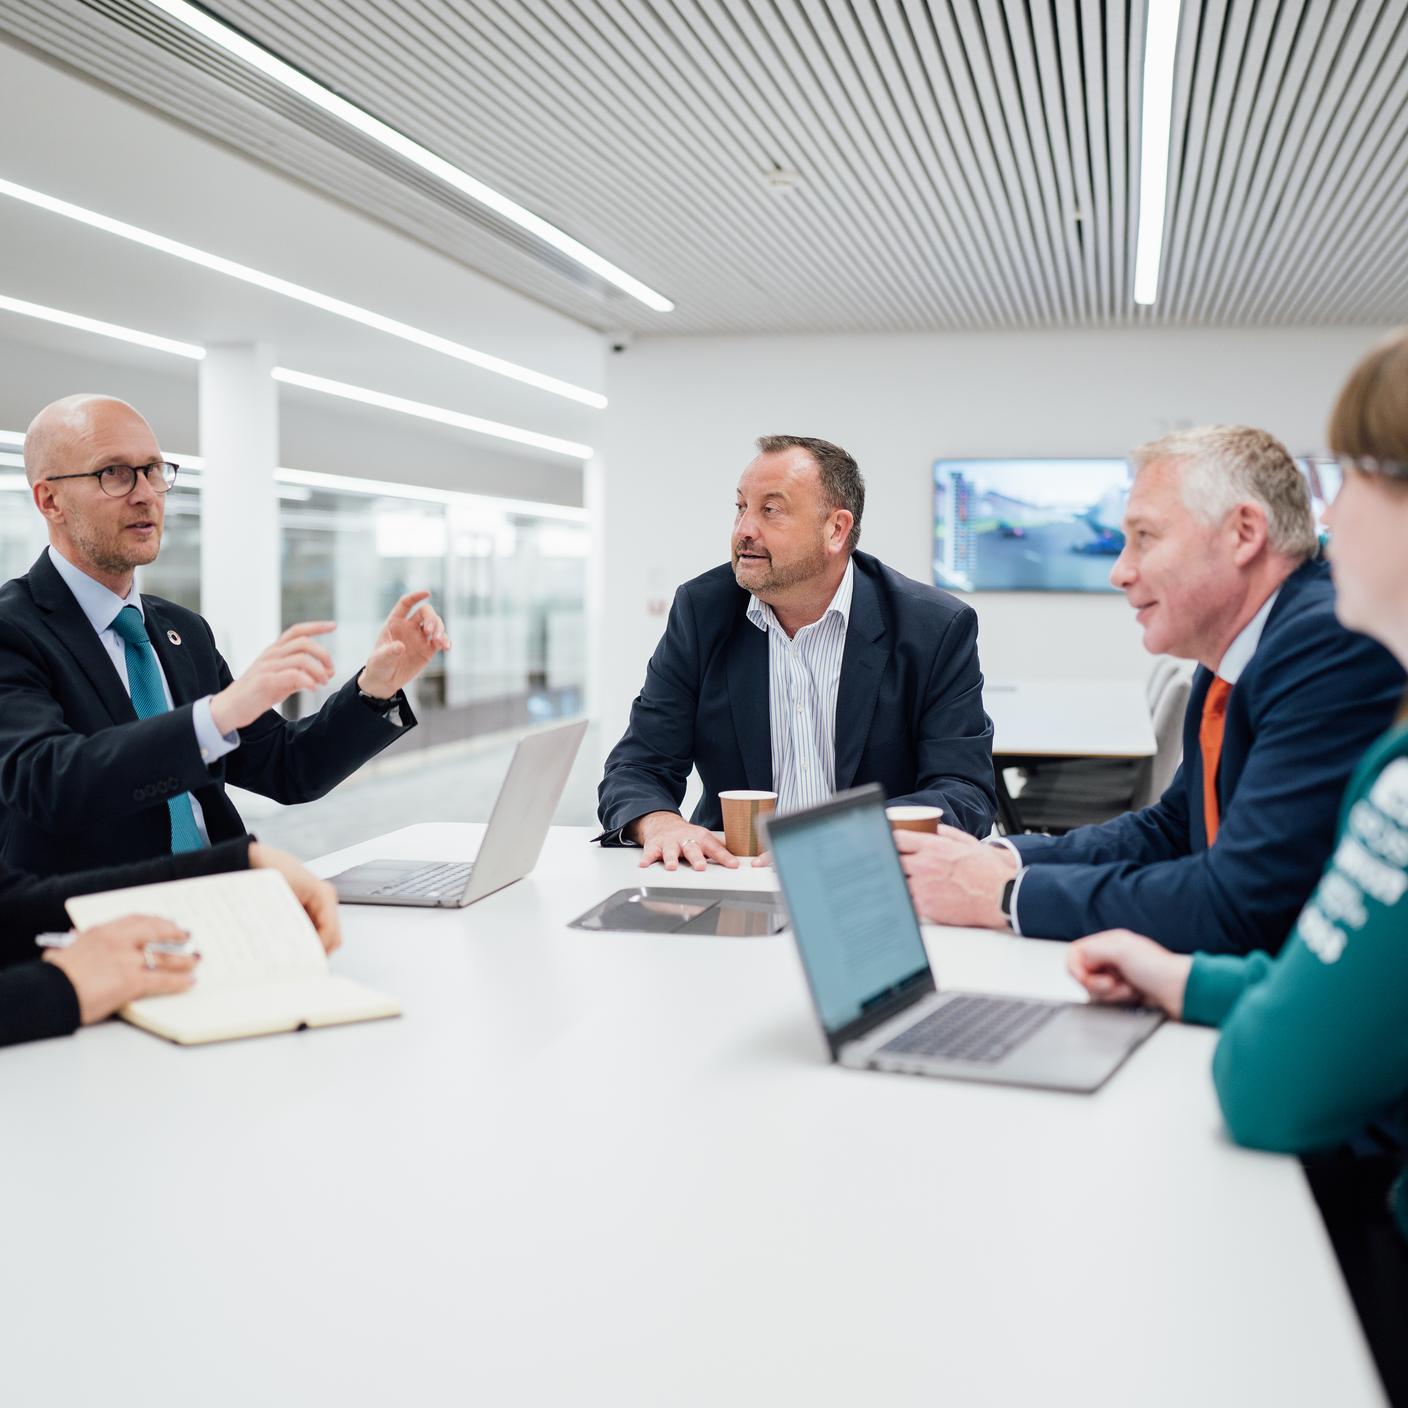 BSI and Aston Martin teams in meeting in smart office